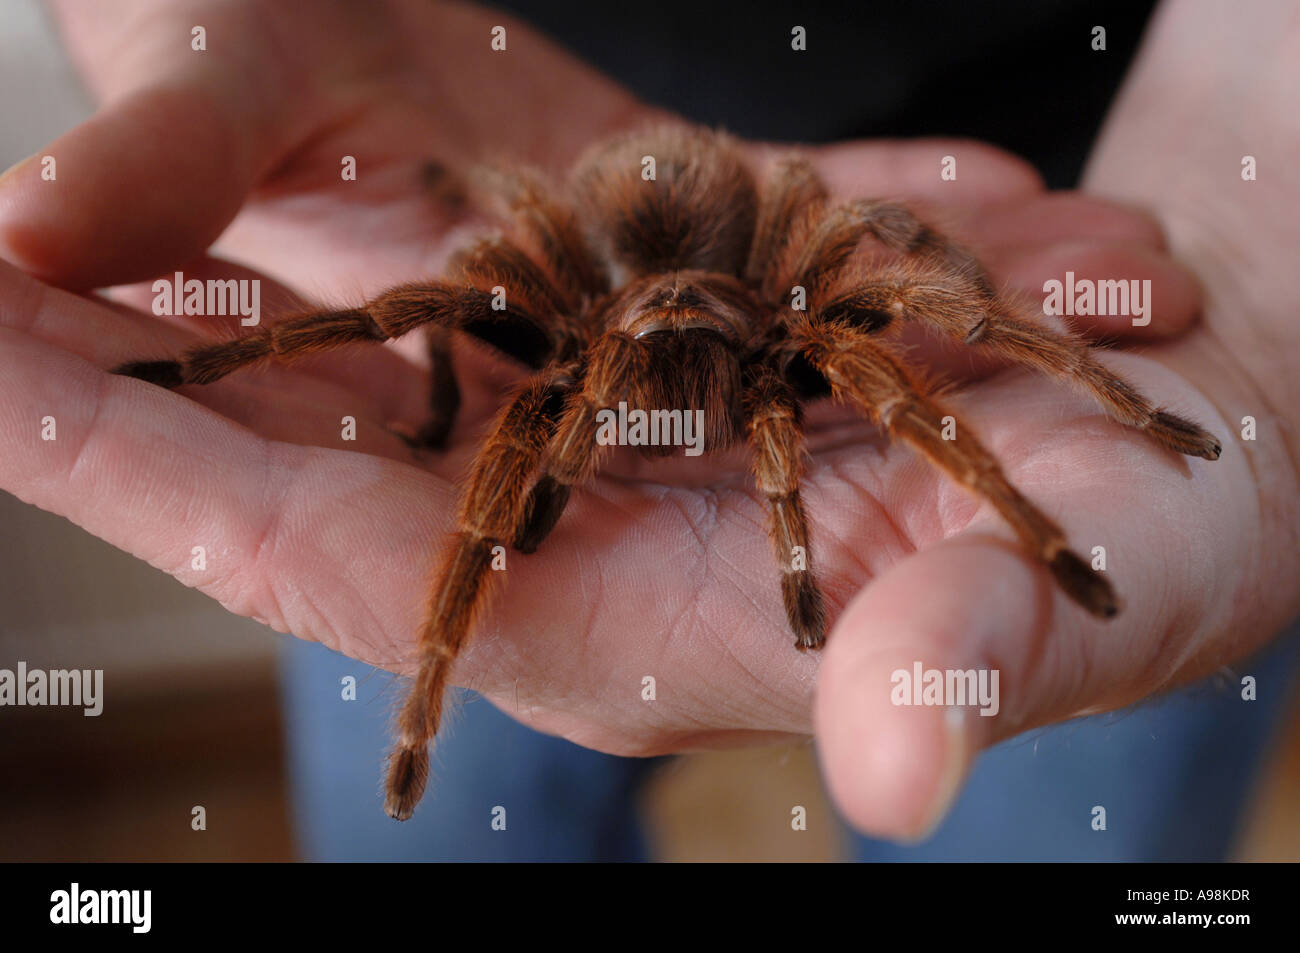 A mans hand holding a large tarantula spider Stock Photo